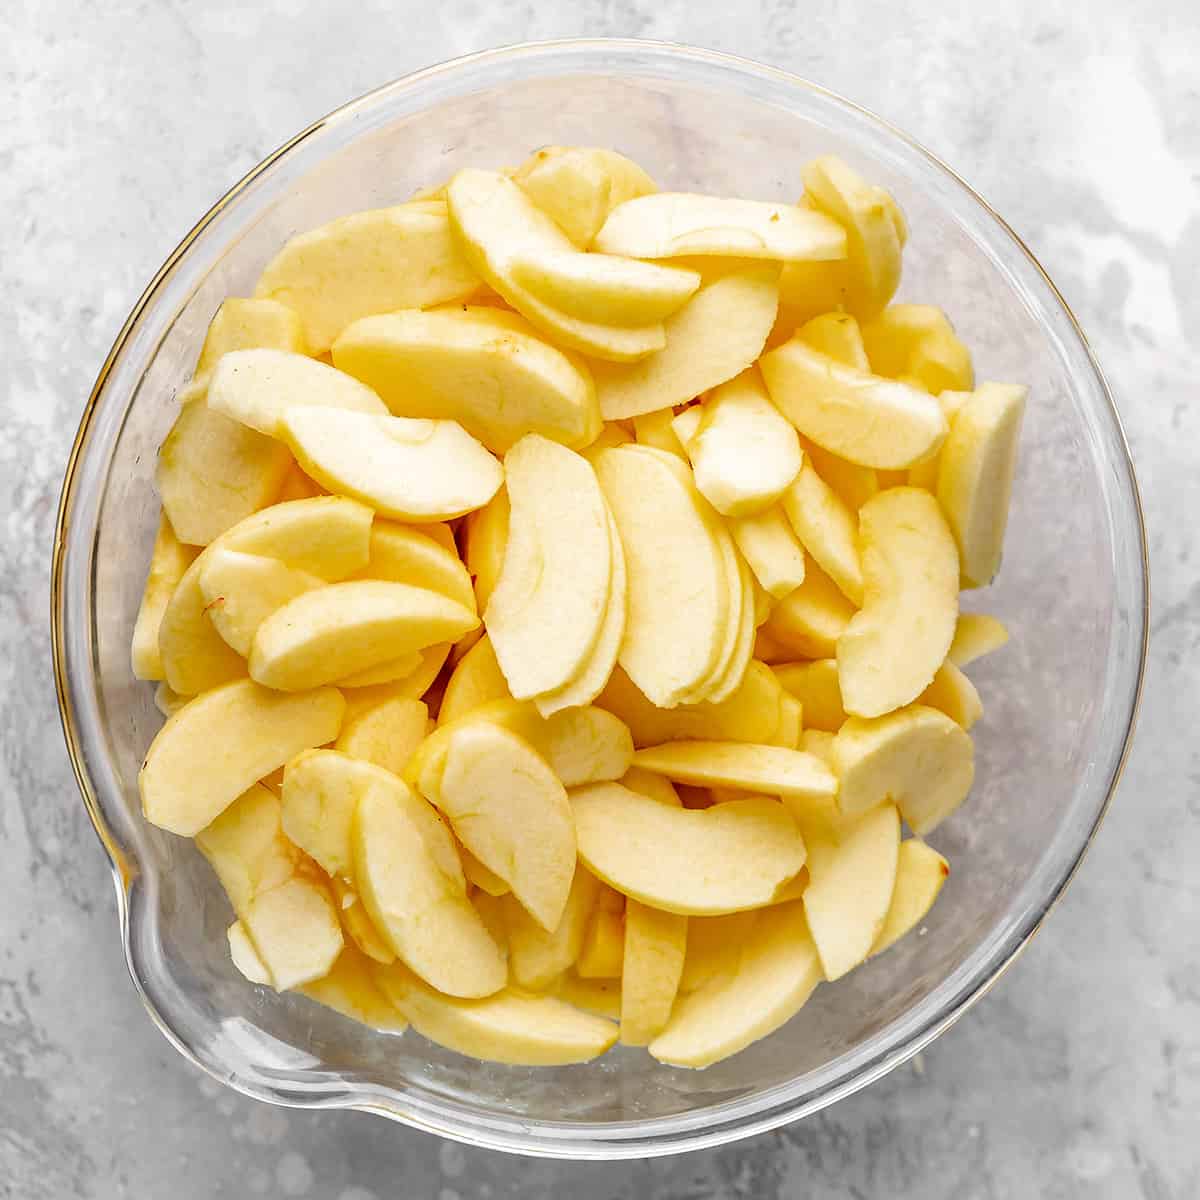 How to Make Apple Pie - peeled & sliced apples in a bowl